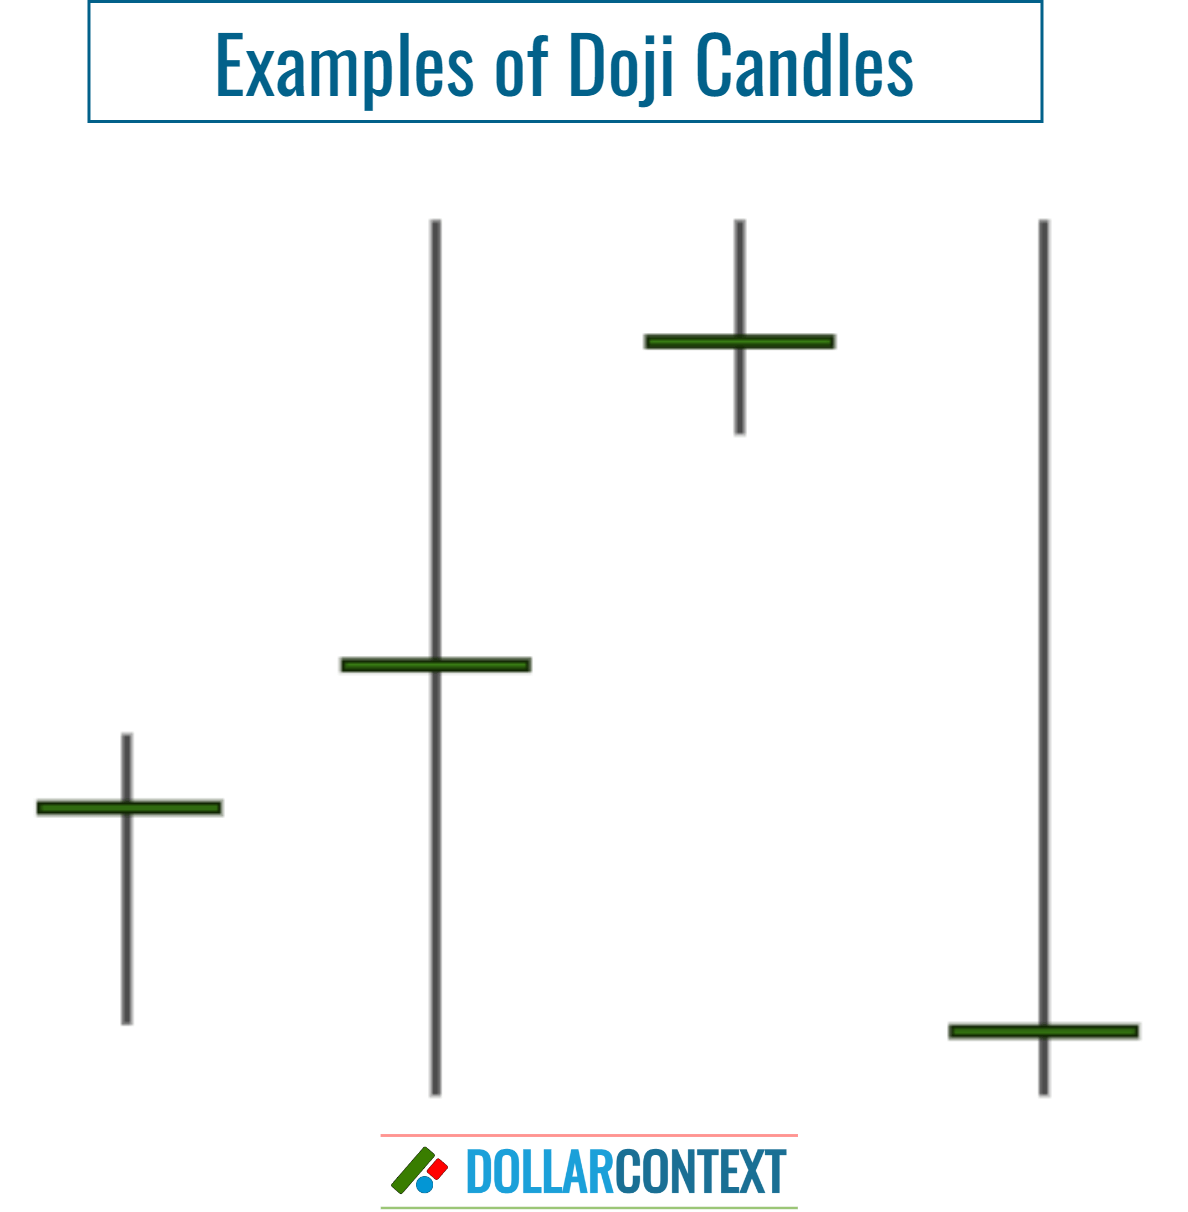 Different Shapes of Doji Candles (Examples)